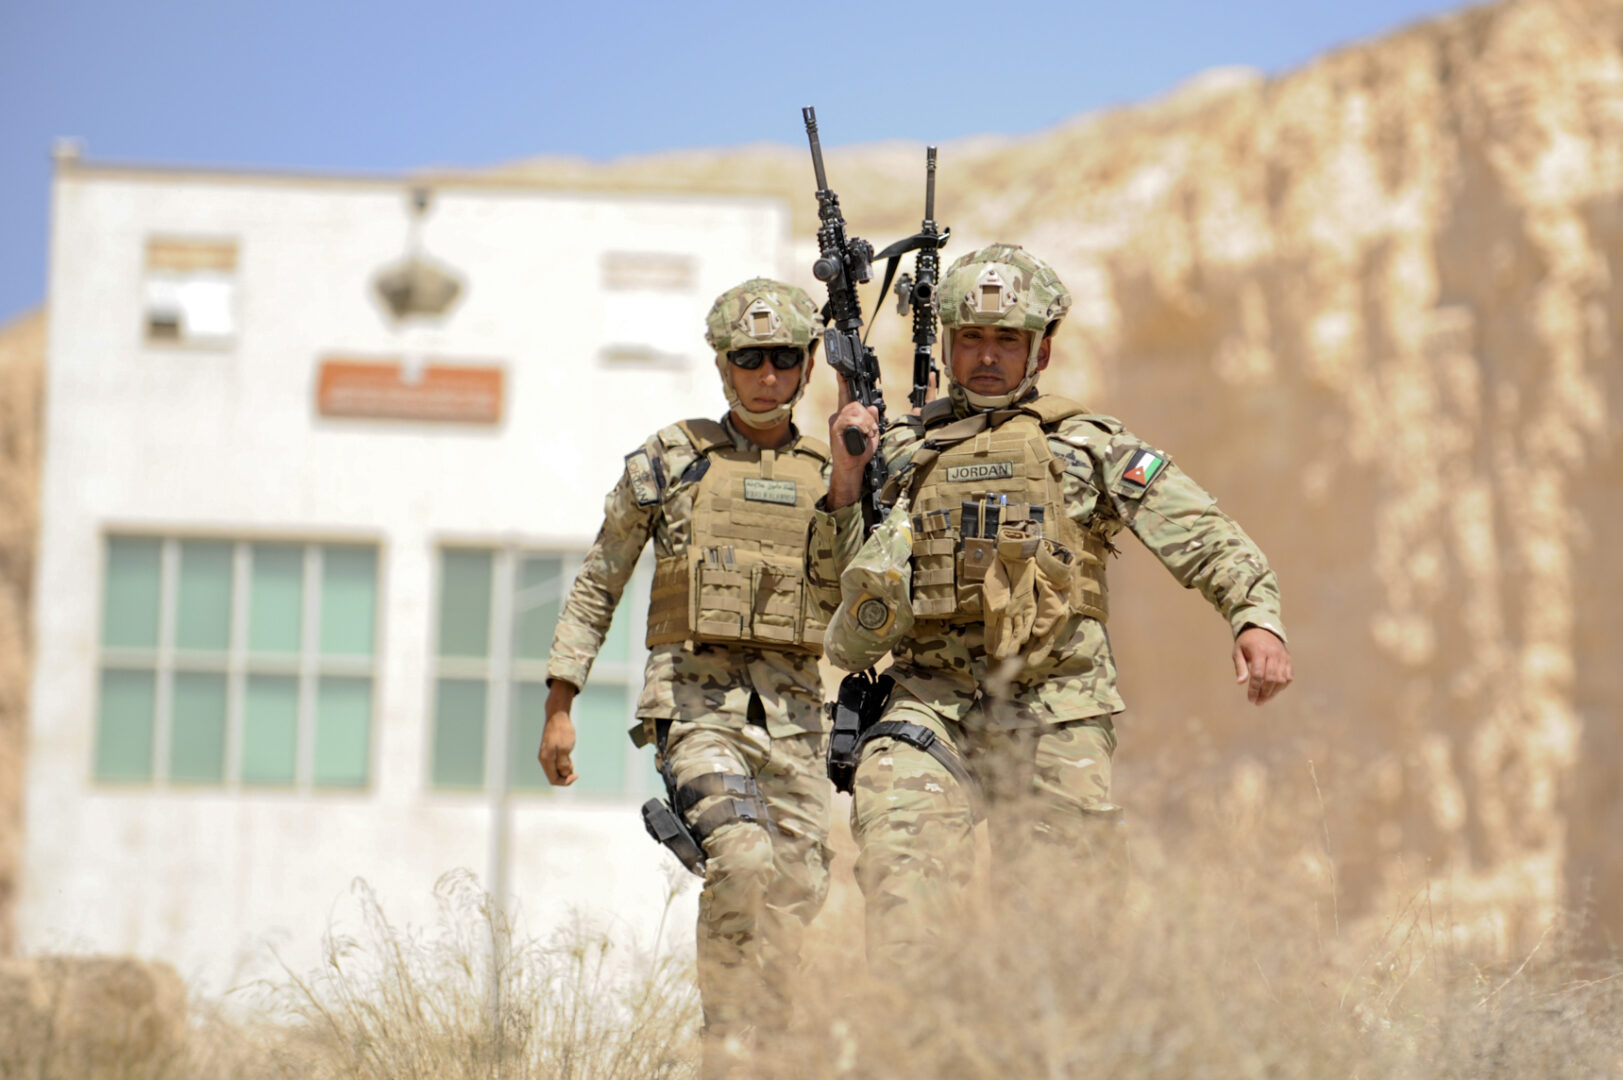 AMMAN, Jordan (May 8, 2017) Soldiers assigned to Jordanian Armed Forces Special Task Force 101, participating in small unit tactics, clear the perimeter during drill at the King Abdullah II Special Operations Training Center, as part of Exercise Eager Lion. Eager Lion is an annual U.S. Central Command exercise in Jordan designed to strengthen military-to-military relationships between the U.S., Jordan and other international partners. This year's iteration is comprised of about 7,200 military personnel from more than 20 nations that will respond to scenarios involving border security, command and control, cyber defense and battlespace management. (U.S. Navy photo by Mass Communication Specialist 1st Class Matthew Cole/Released) 170508-N-ER662-079